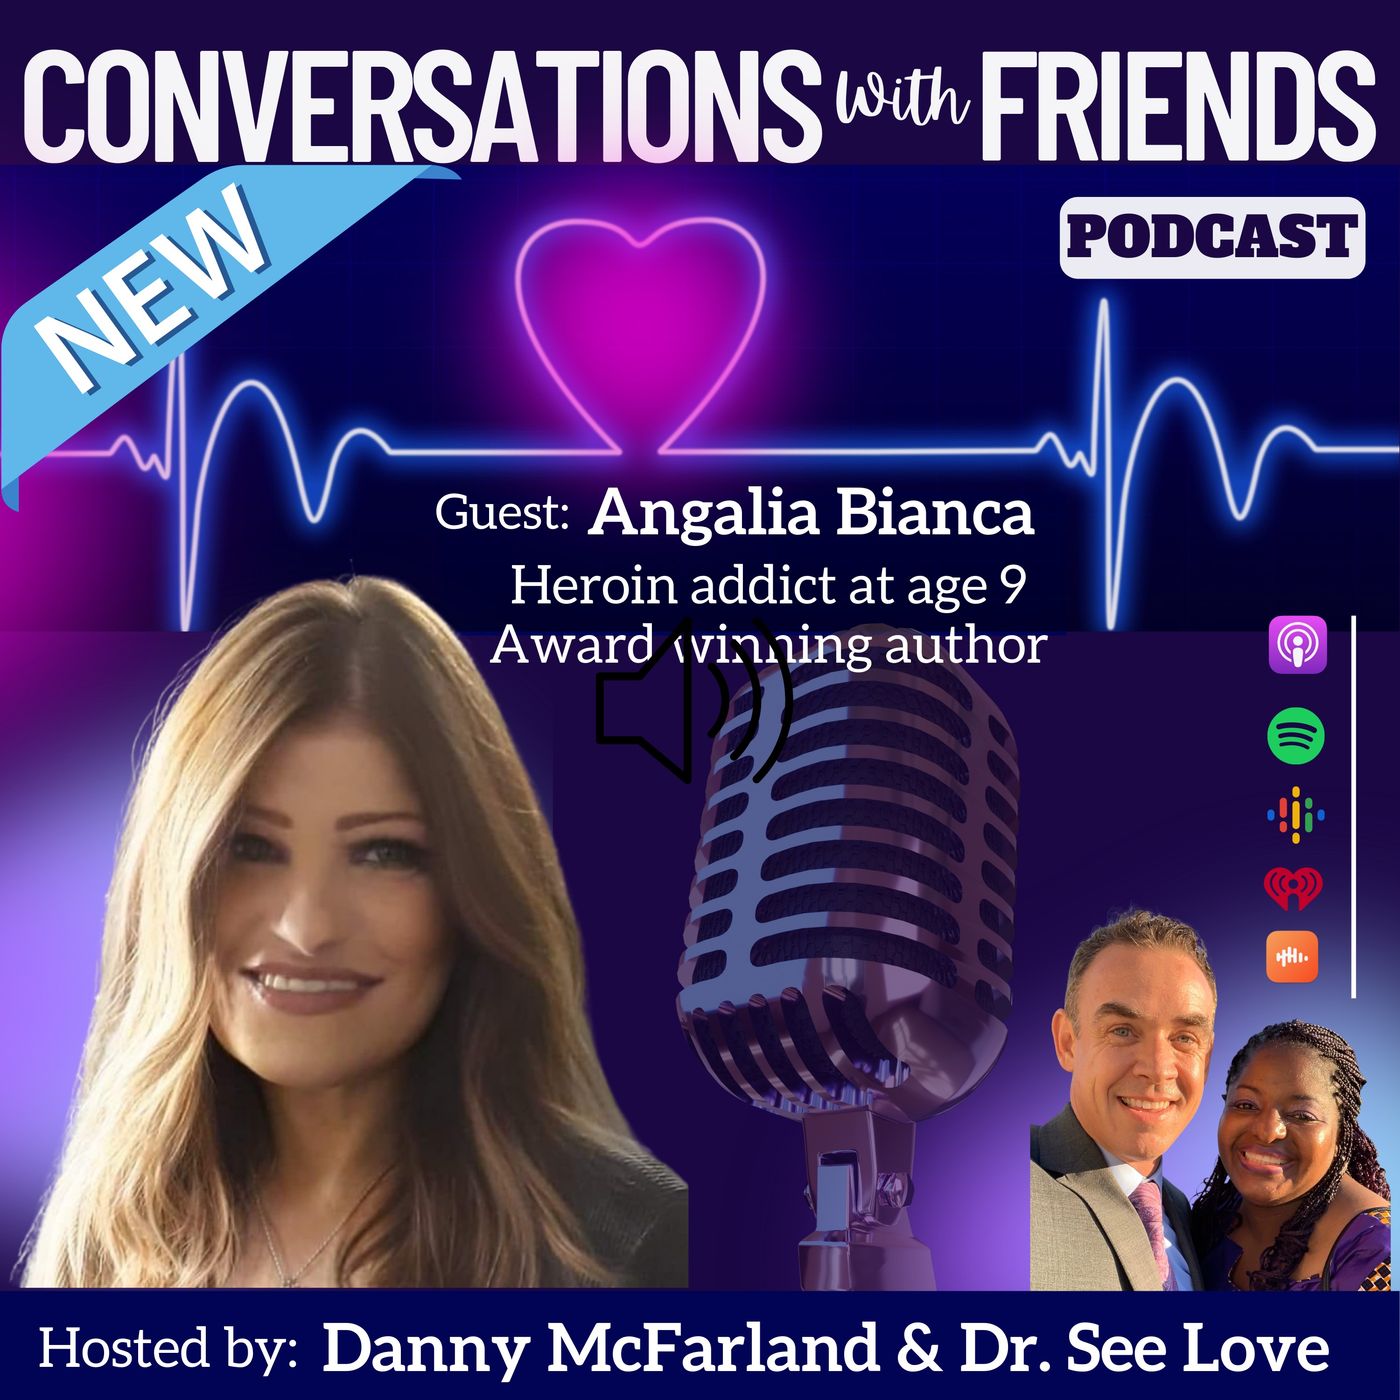 Angalia Bianca, addicted to heroin at age 9, ex felon turns to life of helping others. E48